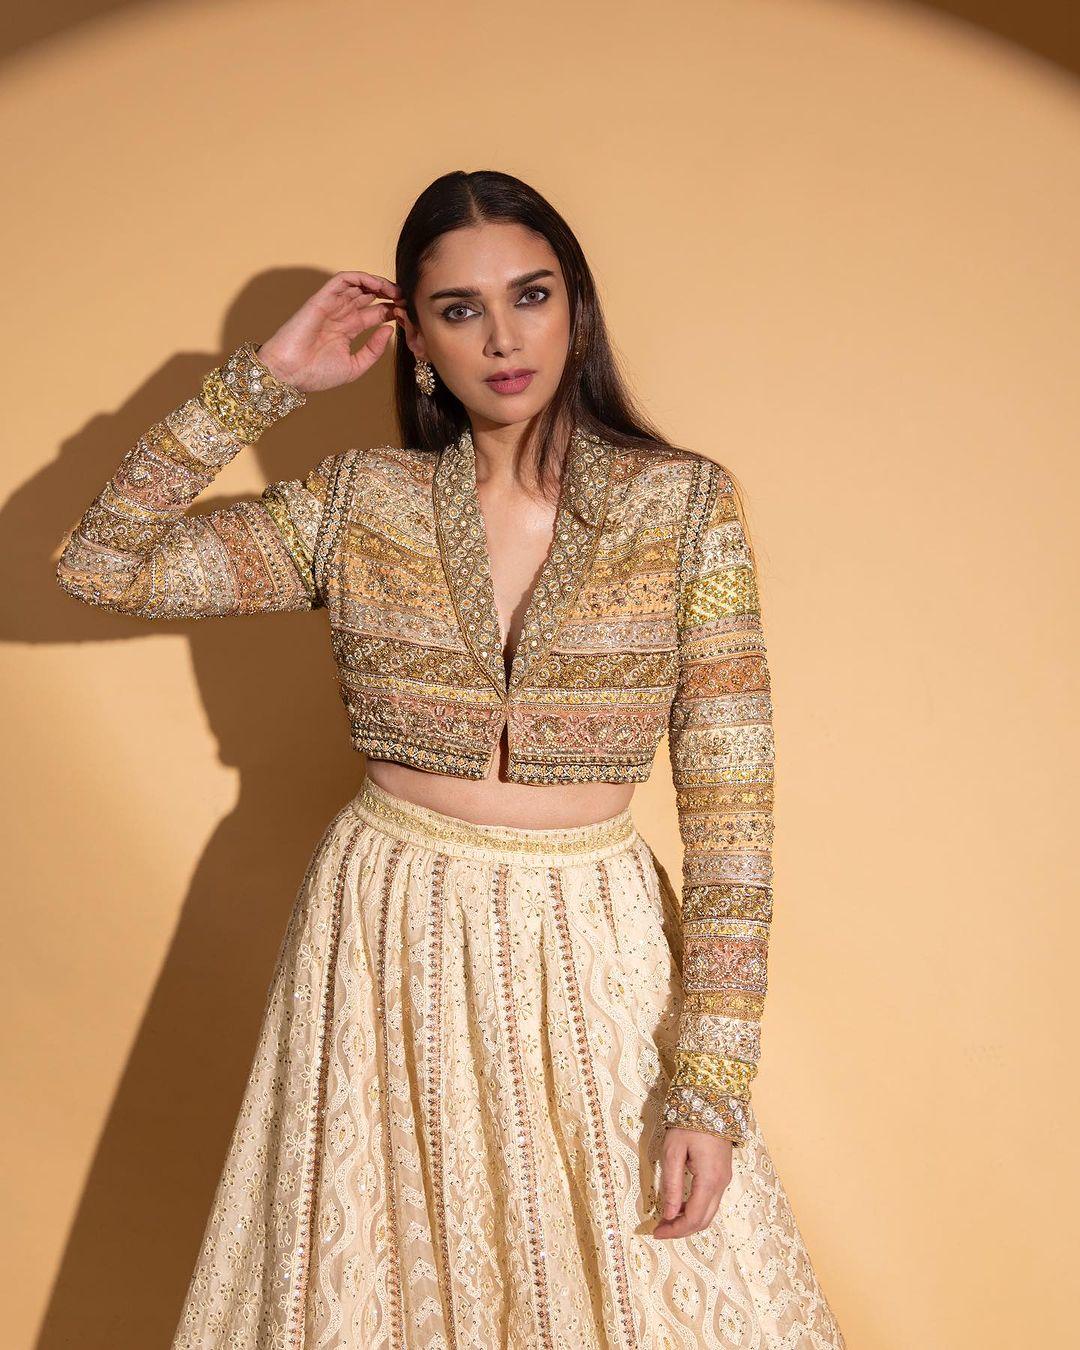 She paired this with a cropped gold zardozi jacket that had intricate geometric and floral designs